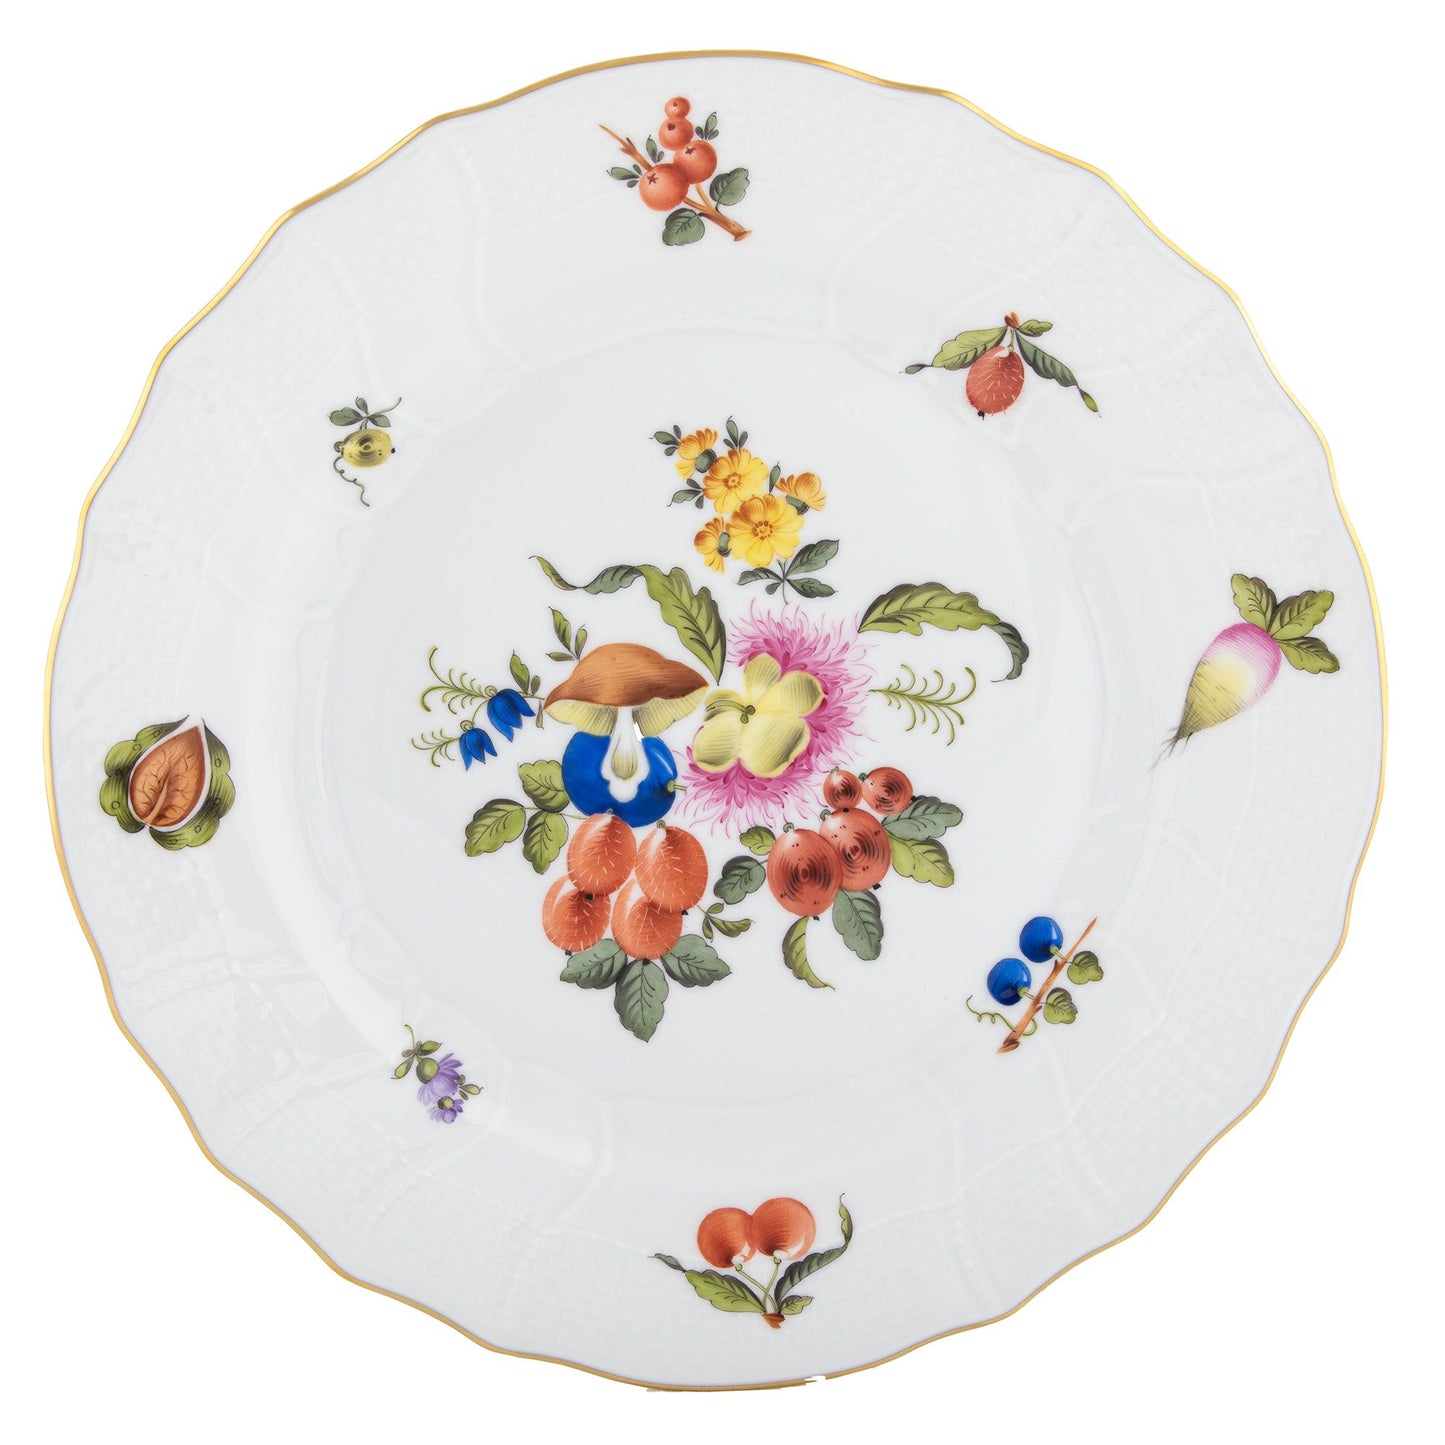 Herend Fruits and Flowers, Dinner Plate